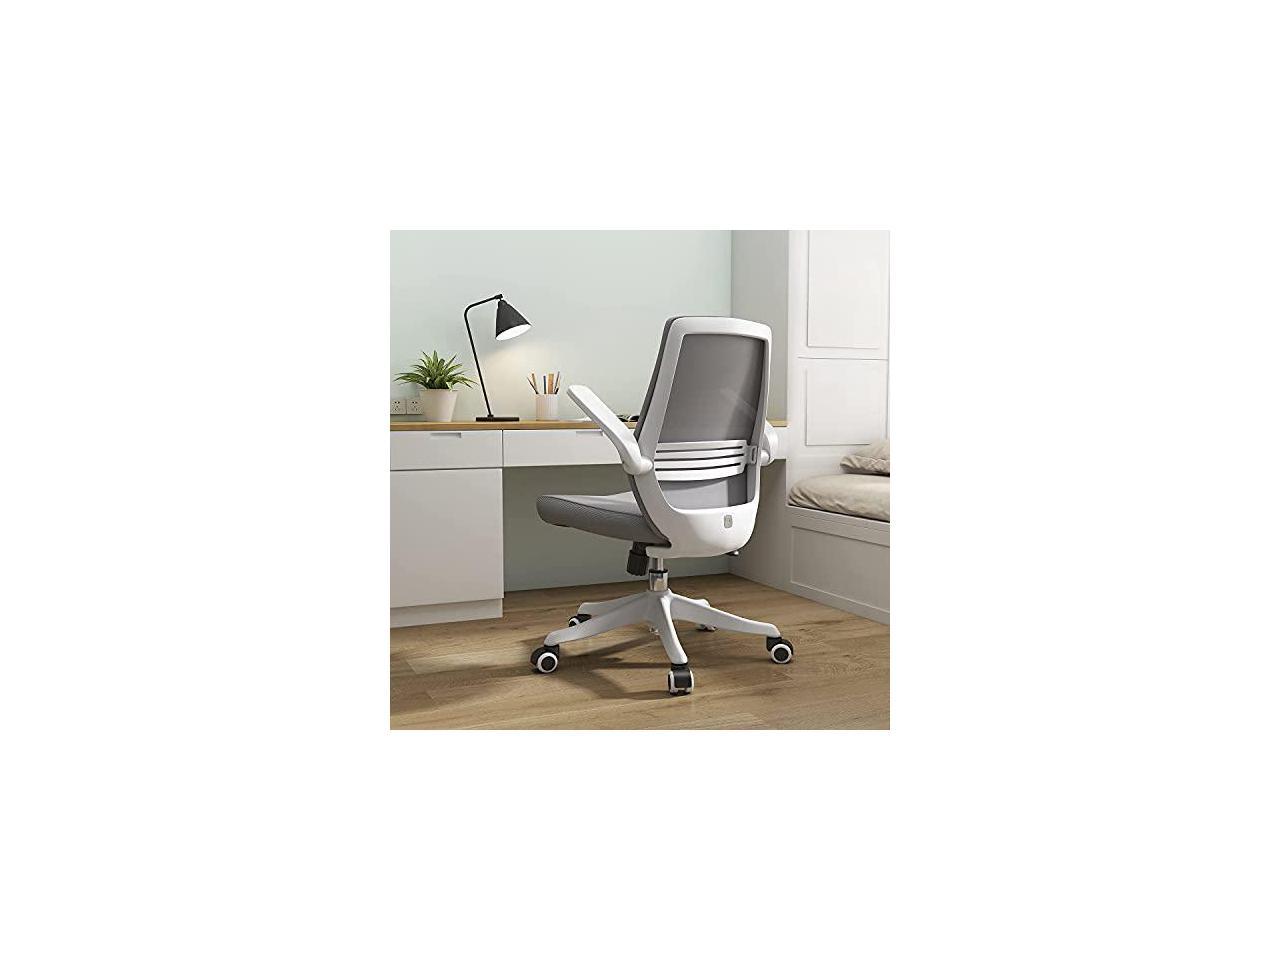 SIHOO Ergonomic Office Chair with Flip-up Armrests for Small Spaces ...